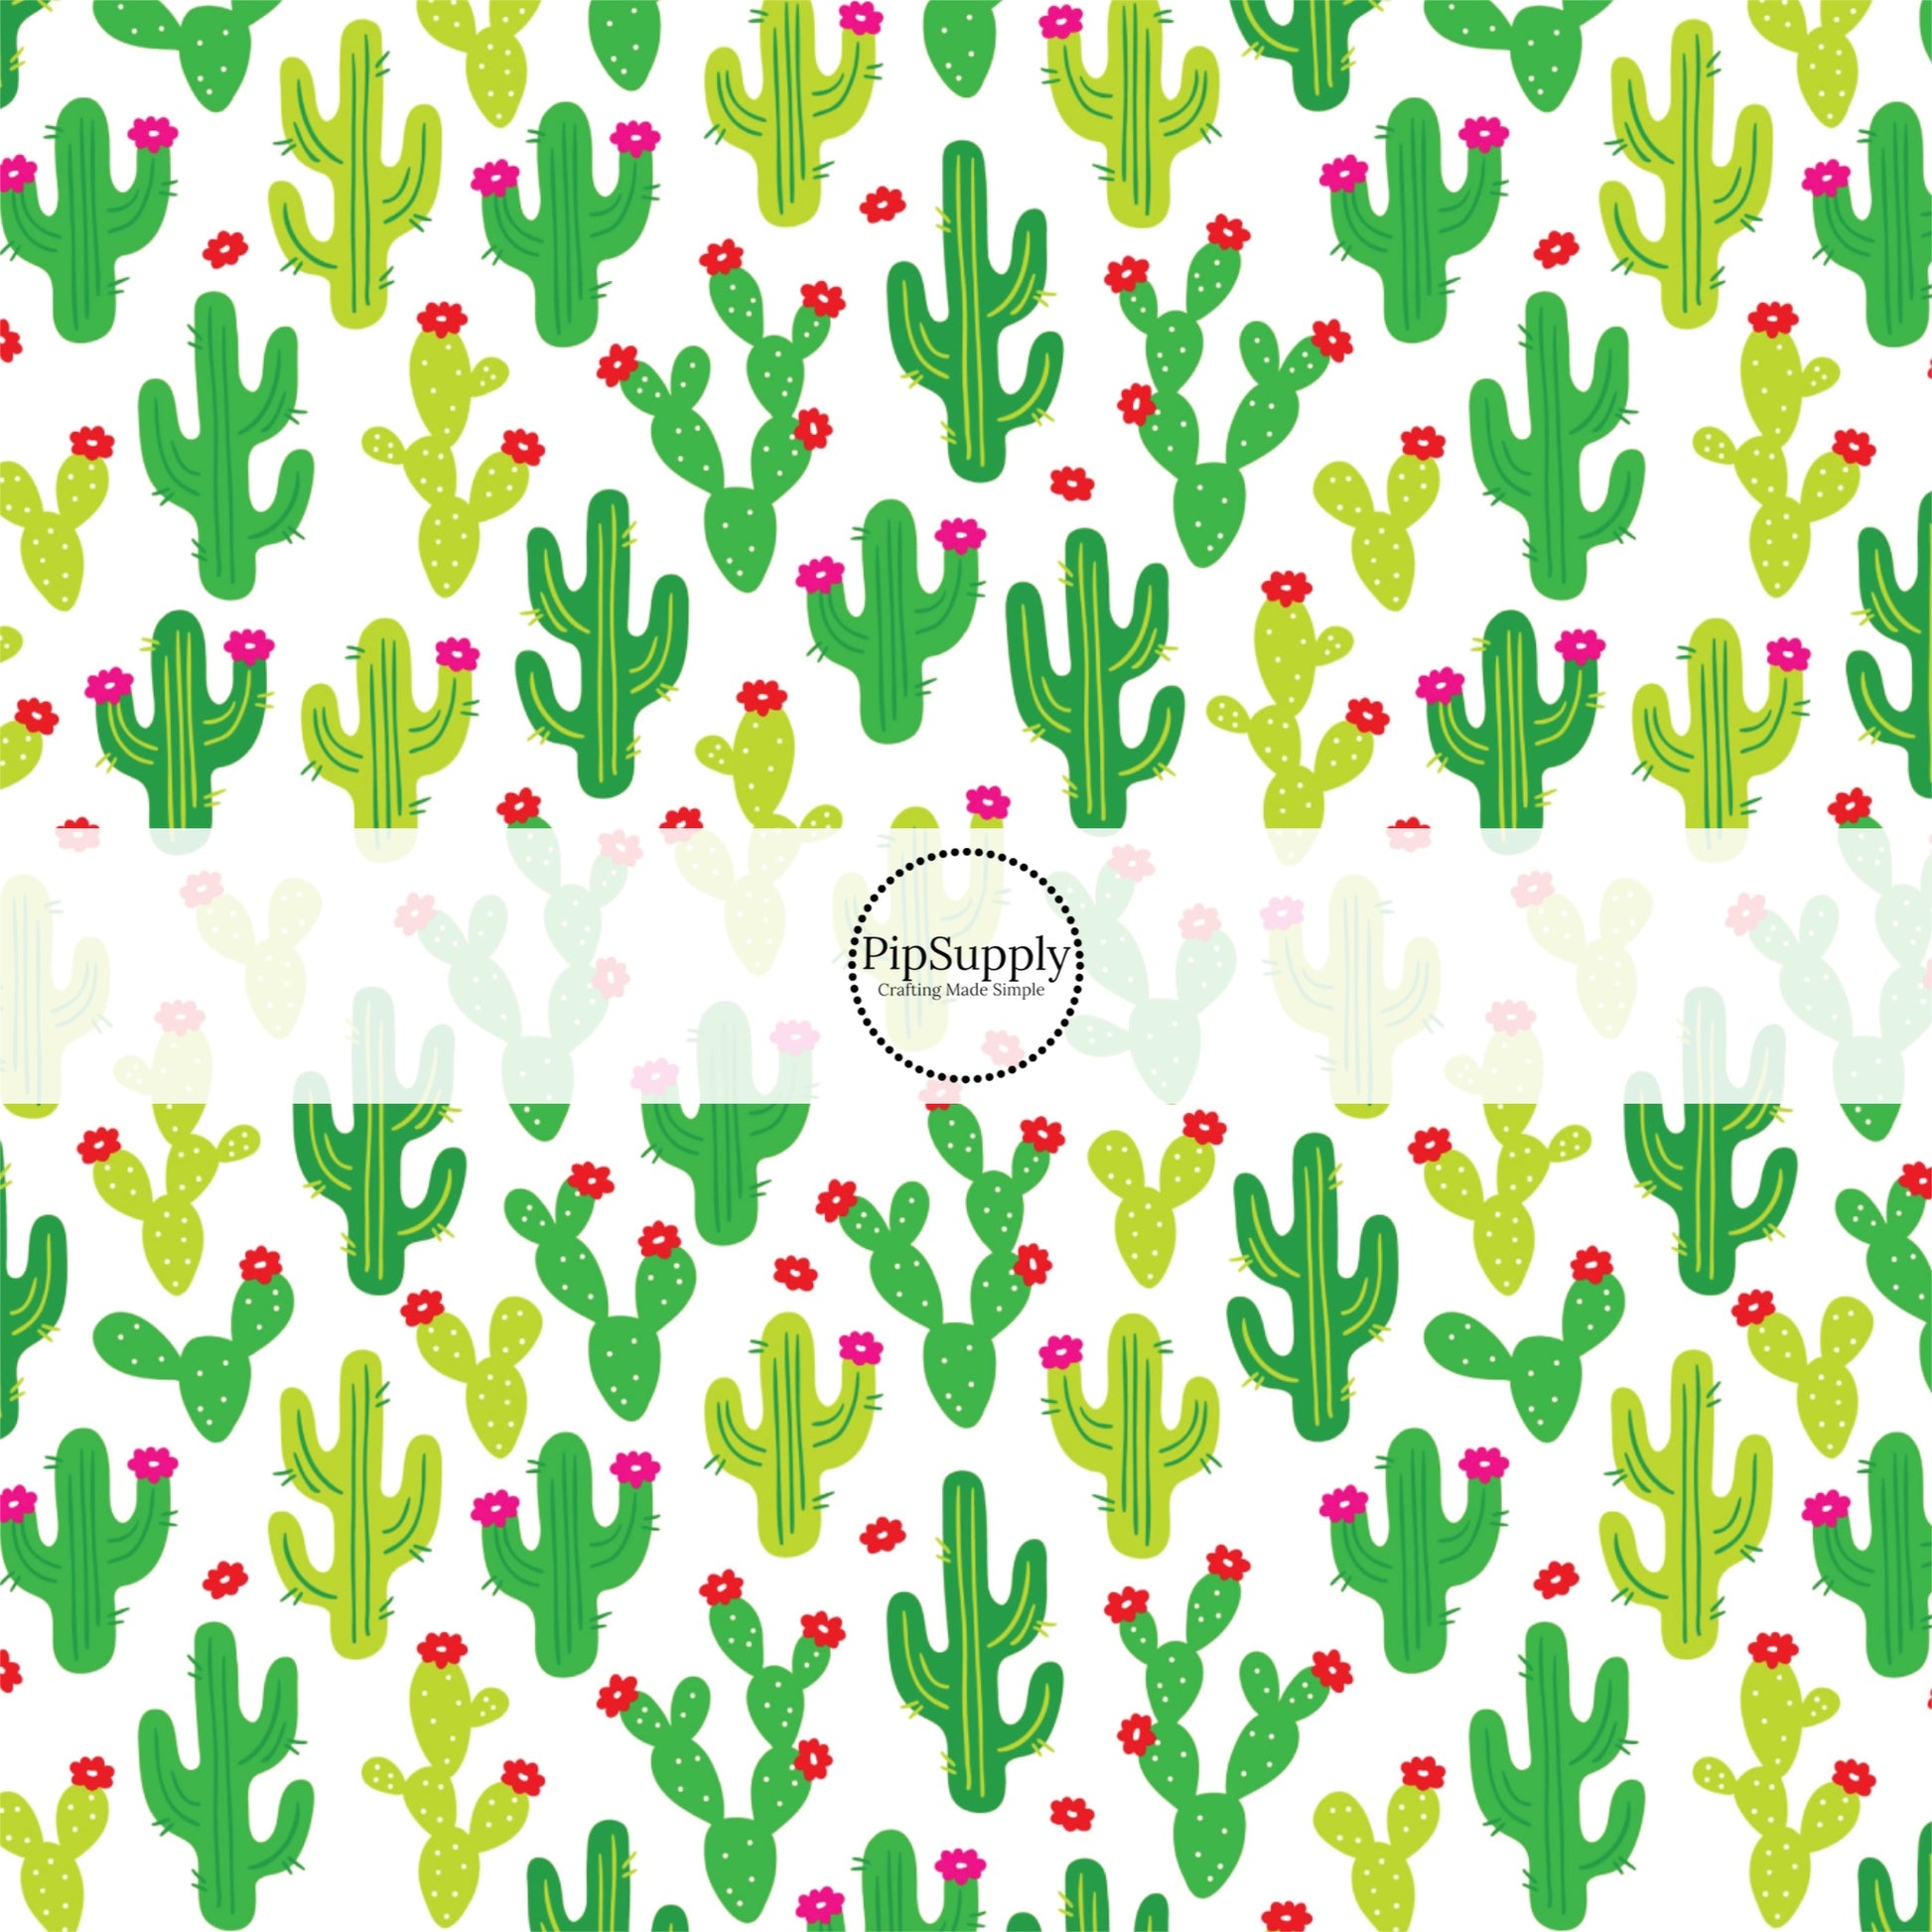 Light green and dark green cactus plants and pink flowers on white fabric by the yard.